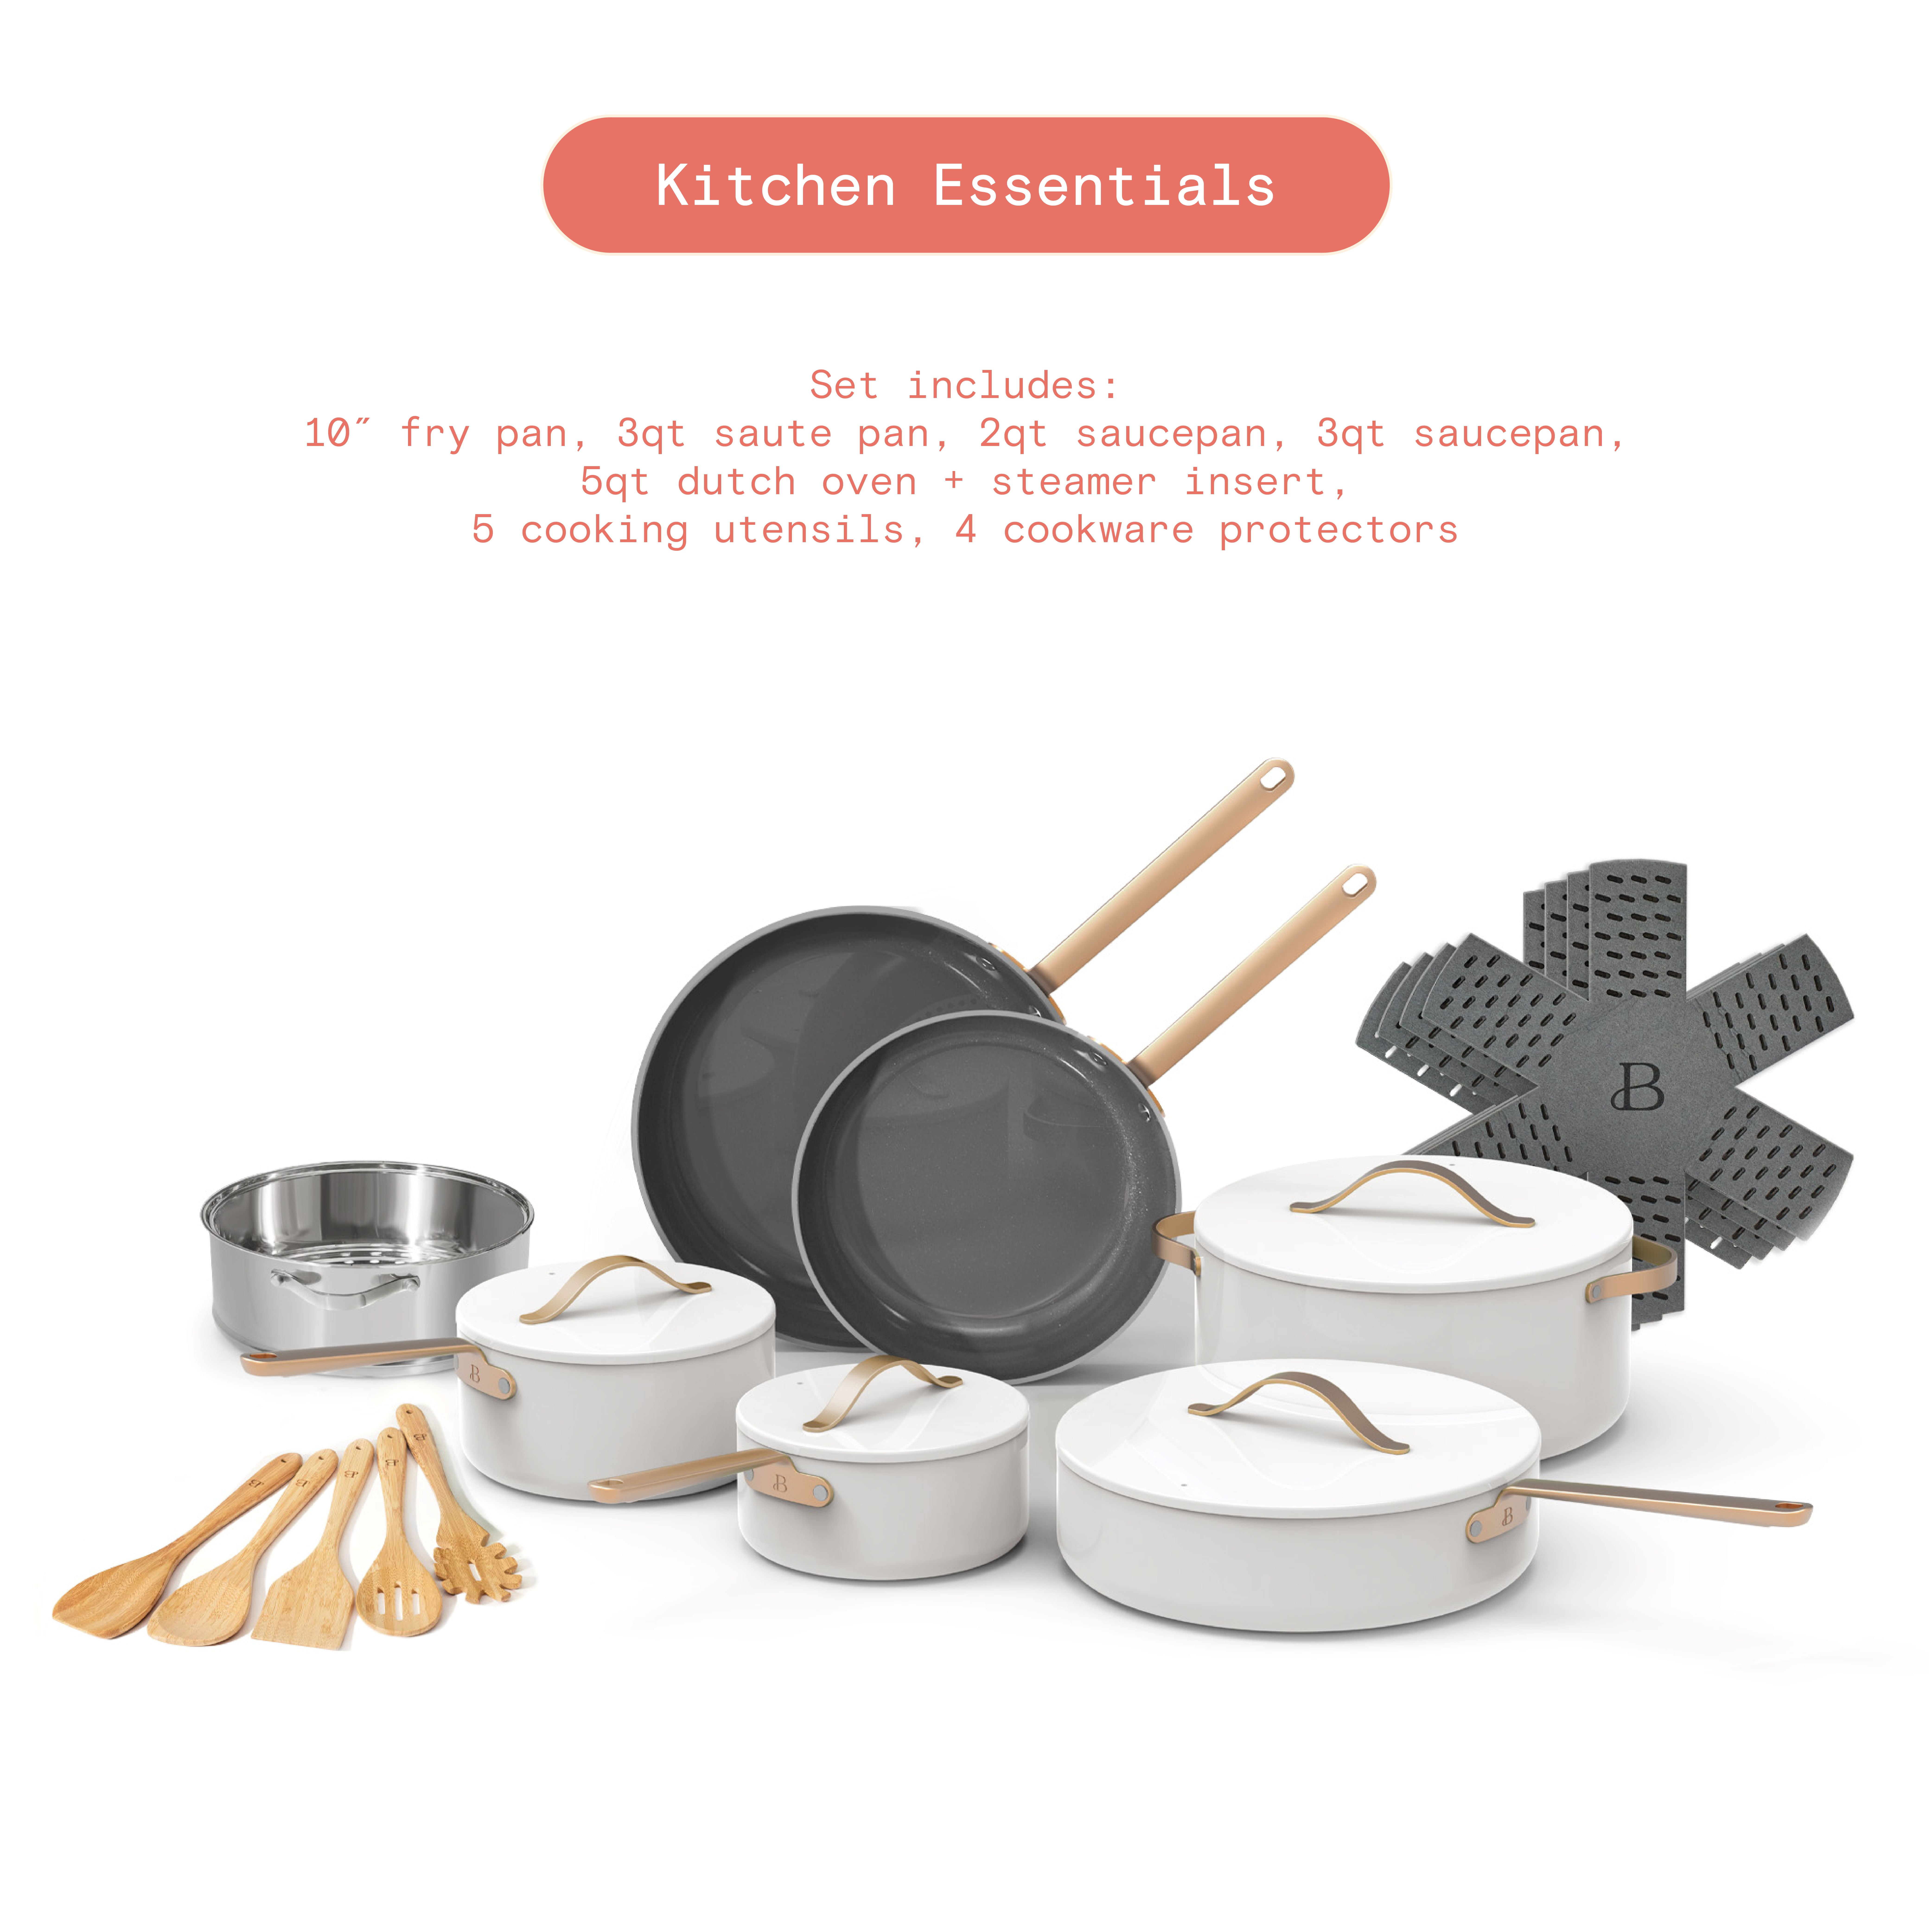 Beautiful by Drew Barrymore Ceramic Cookware Set Review